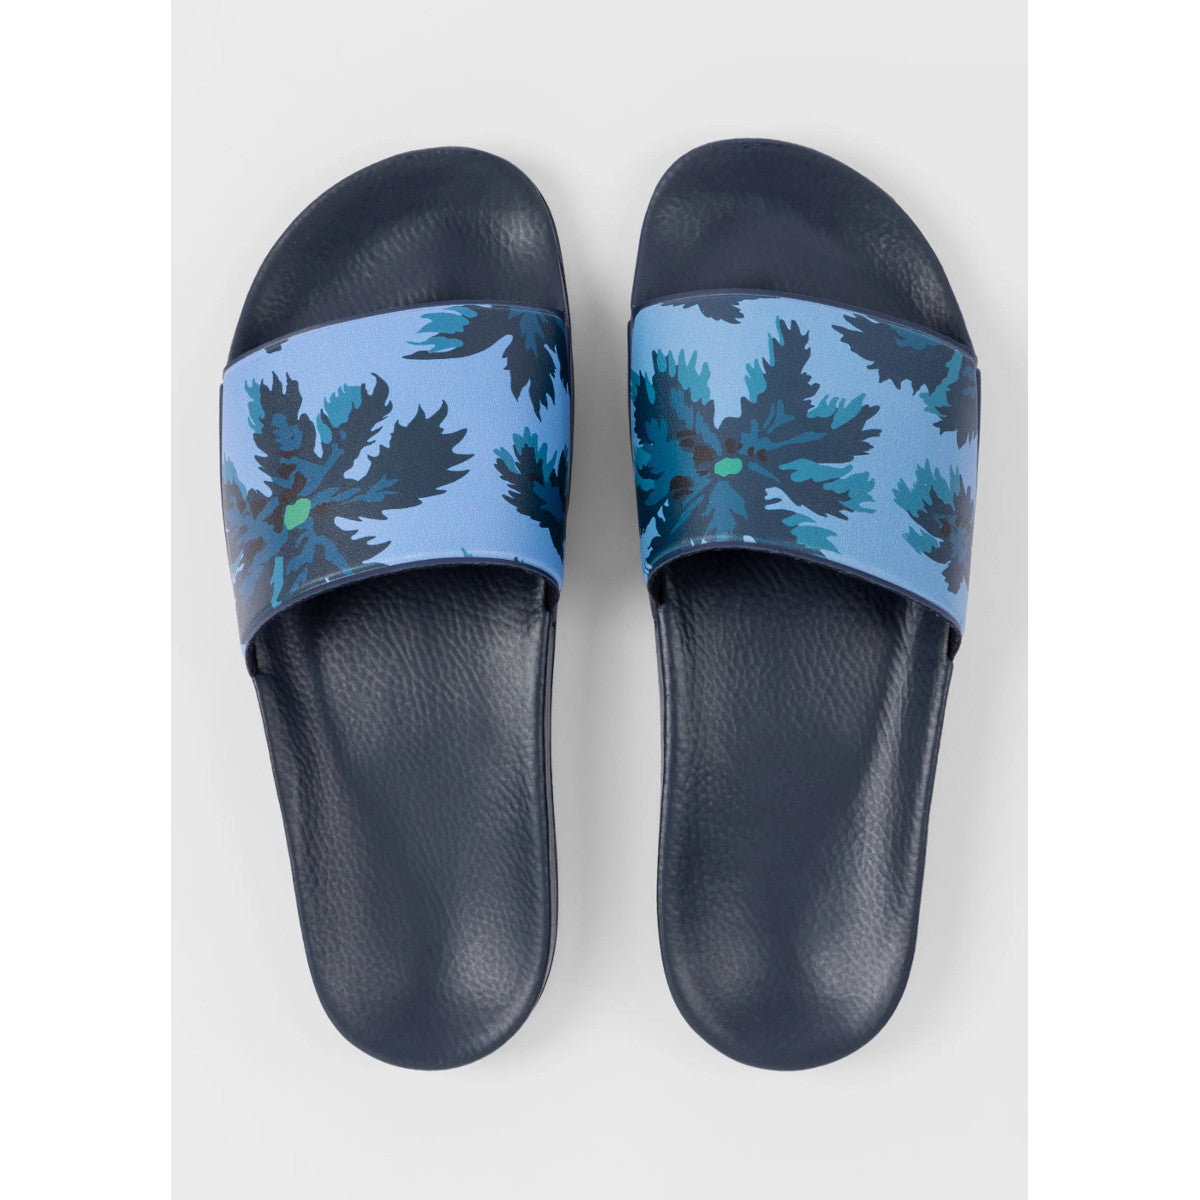 PS Paul Smith Nyro Sliders 92 Blue Floral